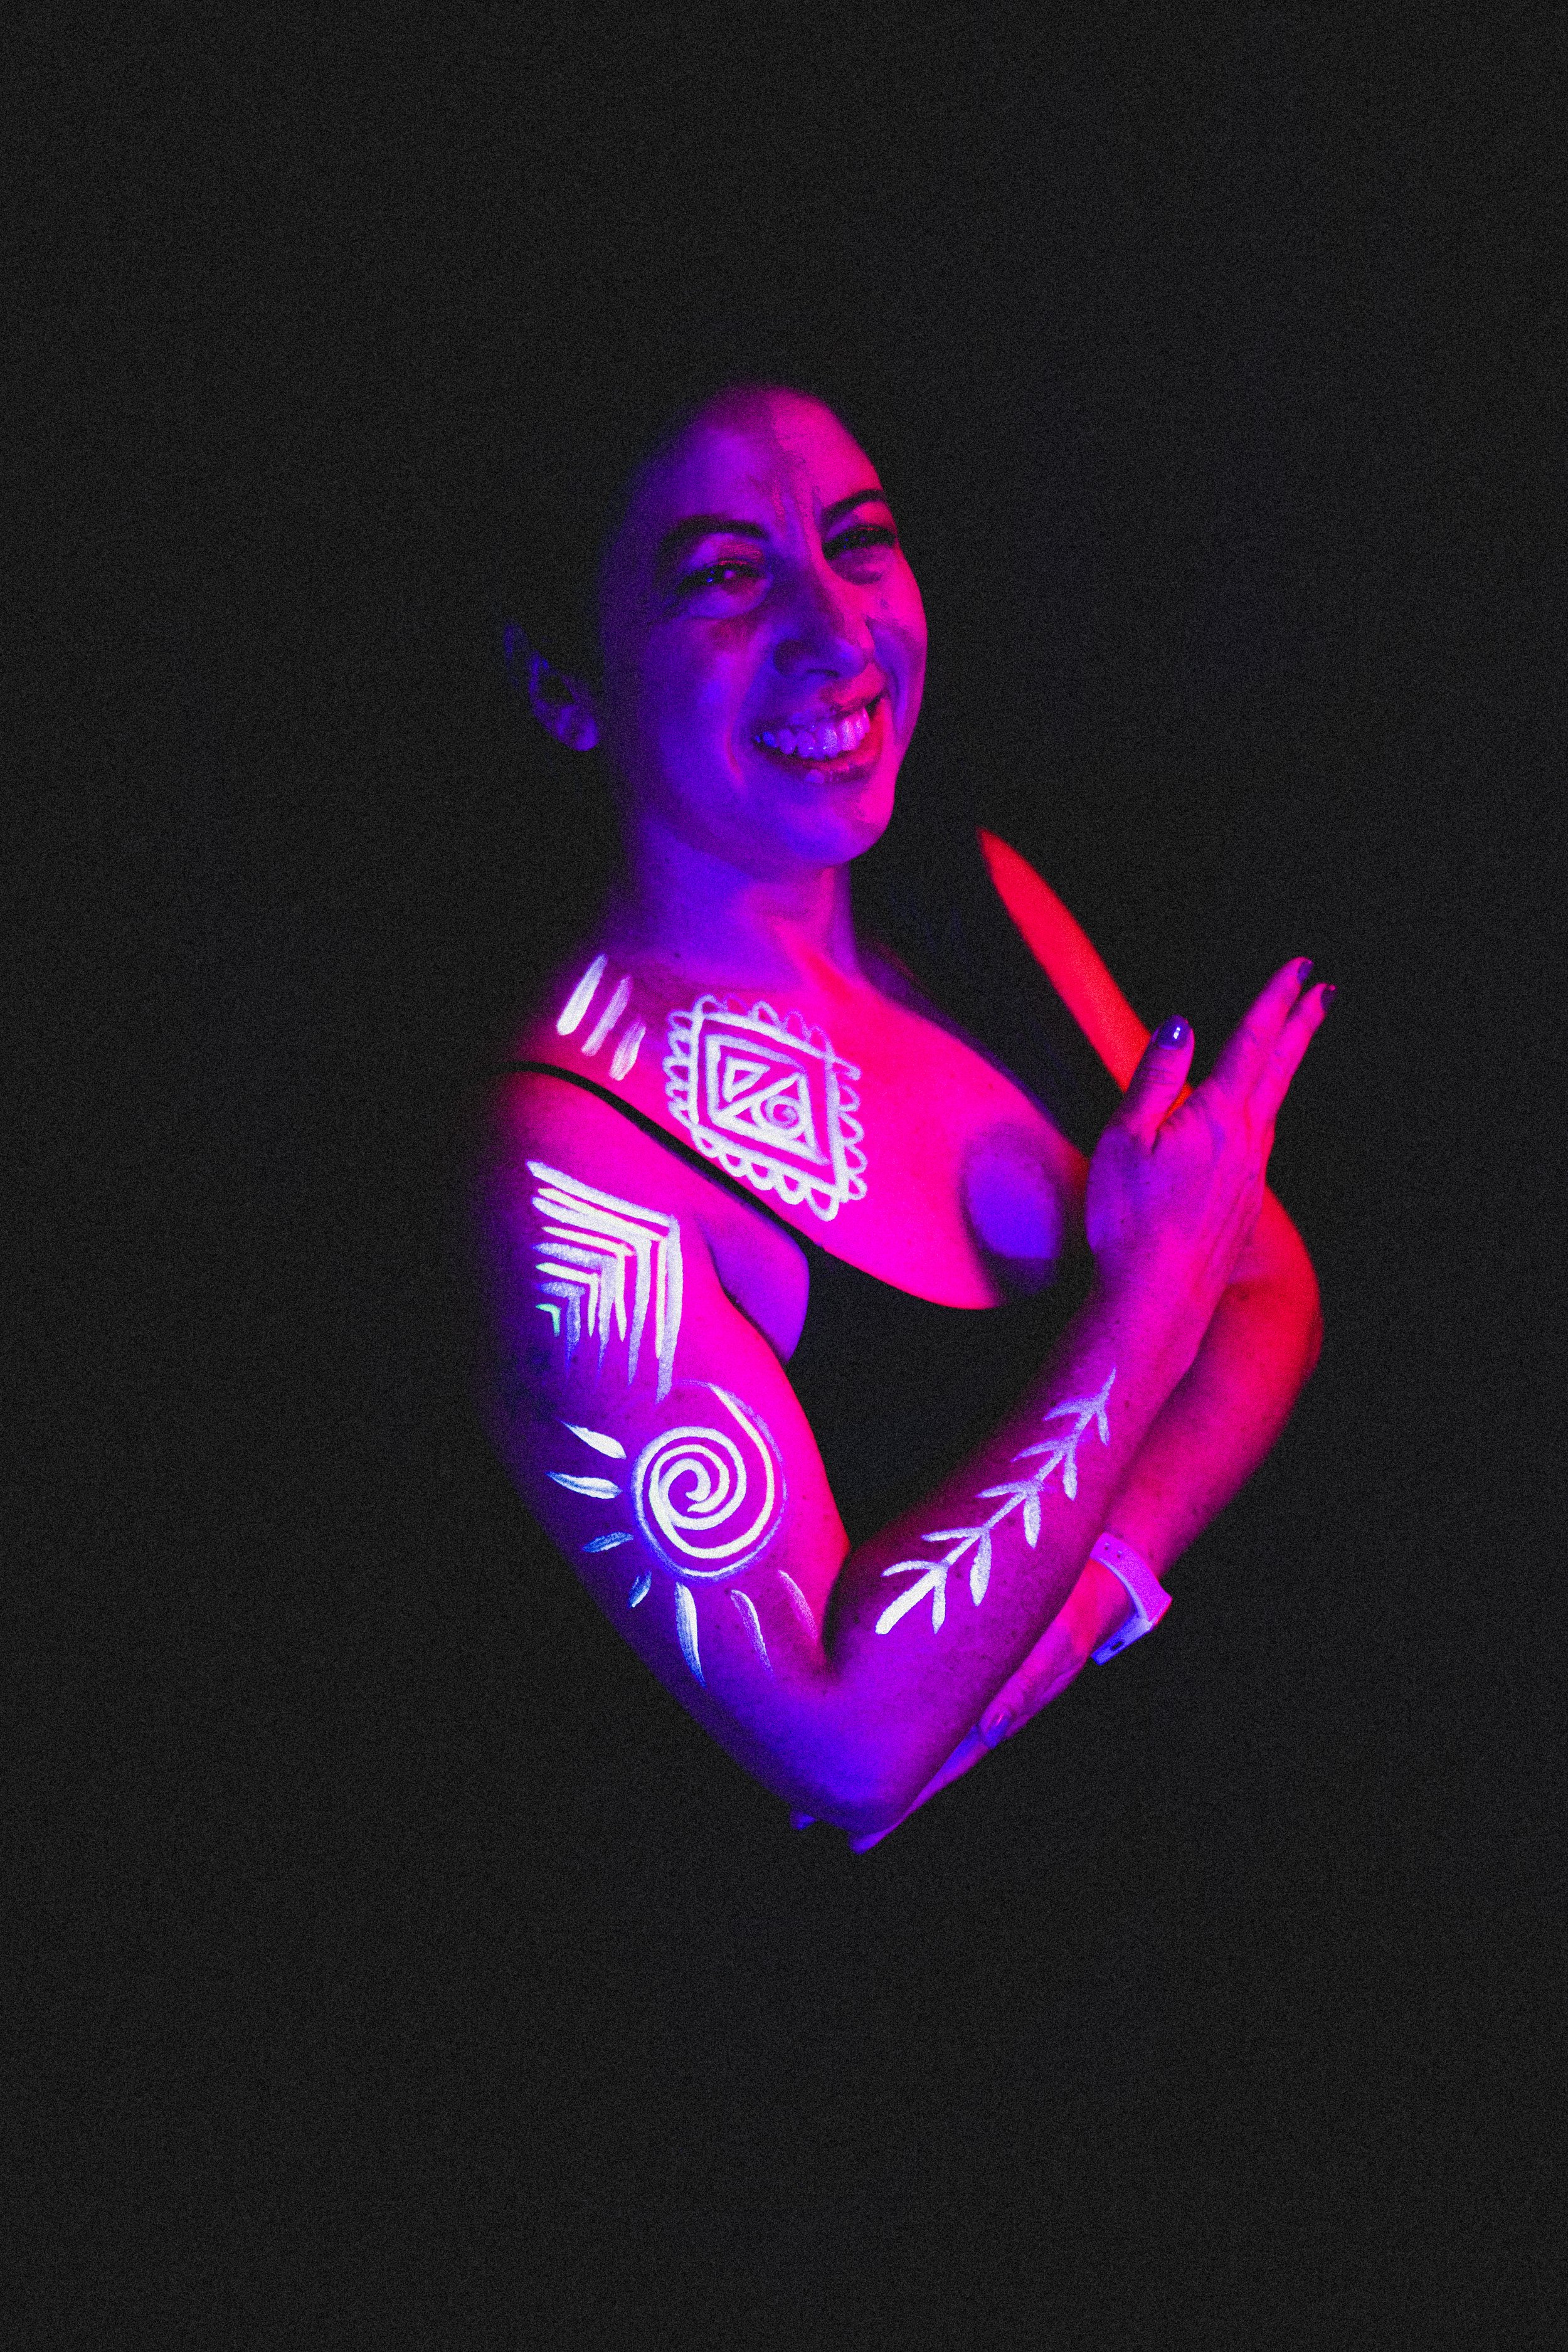 Woman poses with geometric neon body paint on her arm for alternative neon body painting creative photoshoot by phoenix body artist, La Luna Henna and photographer Jennifer Lind Schutsky.